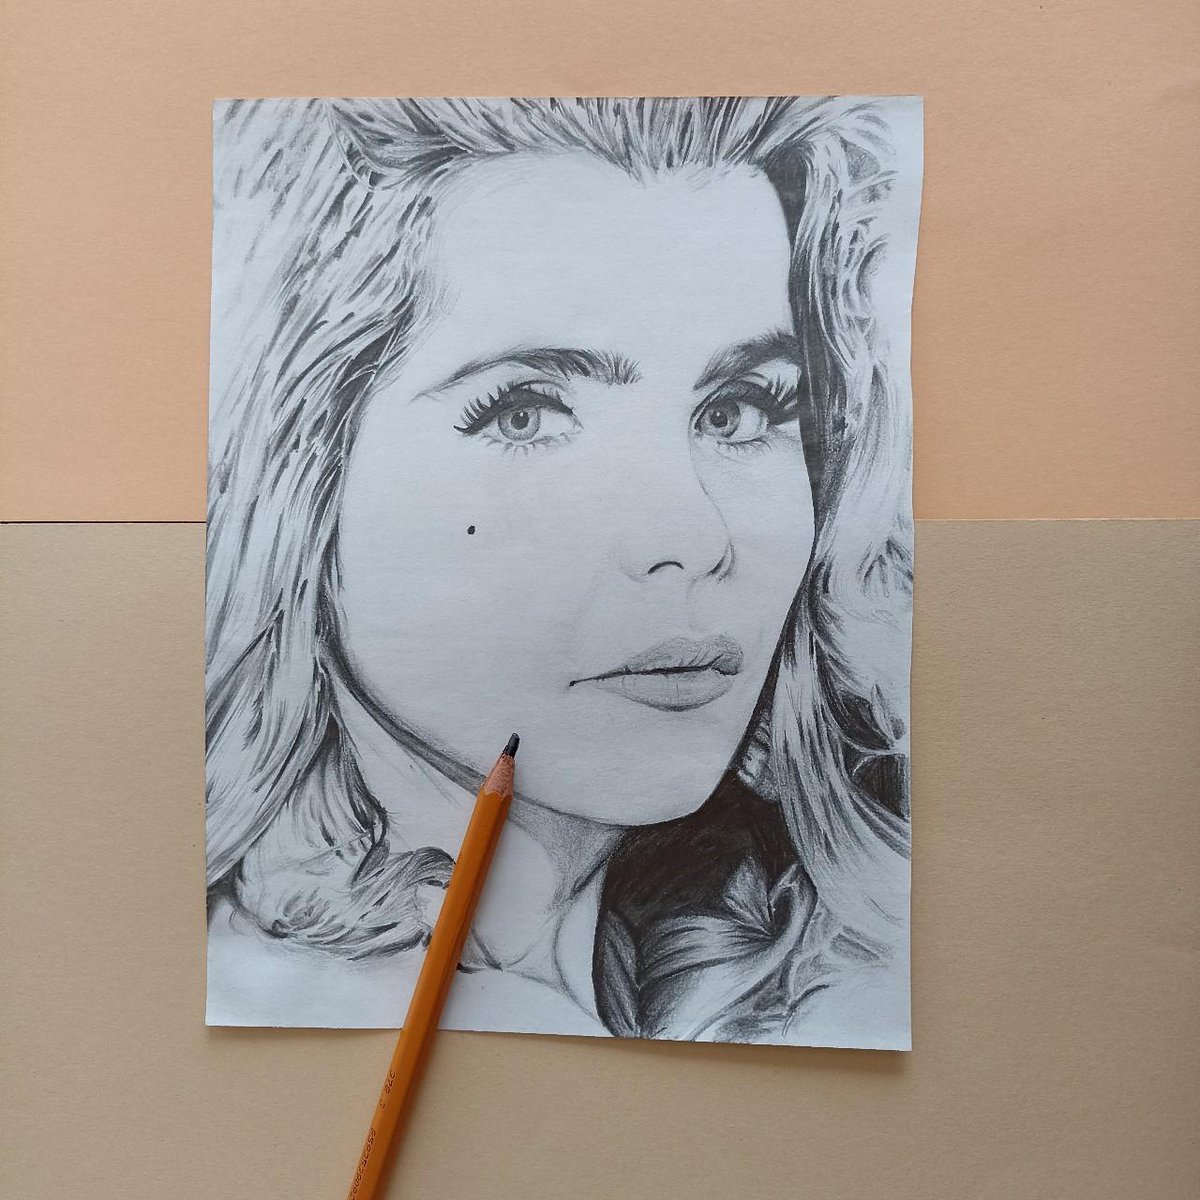 Paloma Faith black and white portrait
Available: depop.com/products/movie…